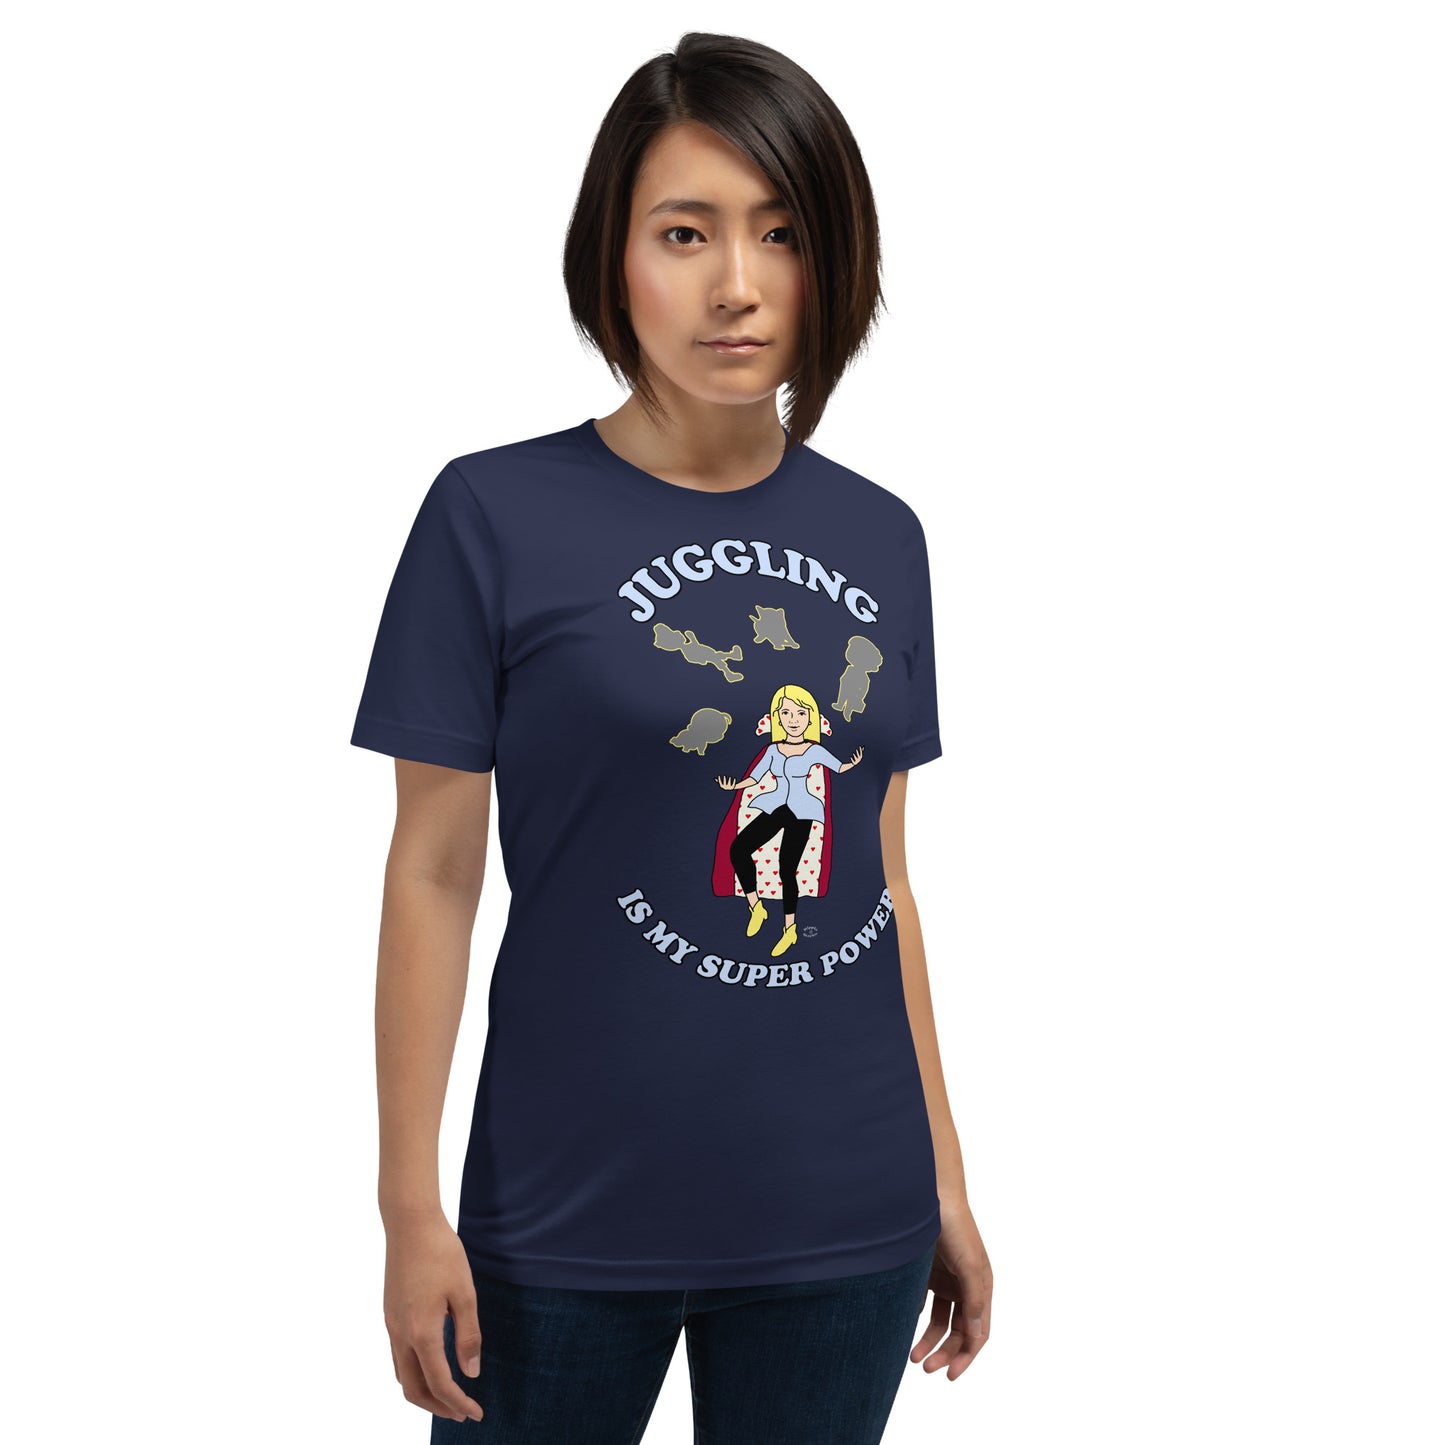 A women wearing a unisex short sleeve tshirt which has on the front a cartoon women in a cape juggling her family like a jester and the text Juggling Is My Super Power - front - navy